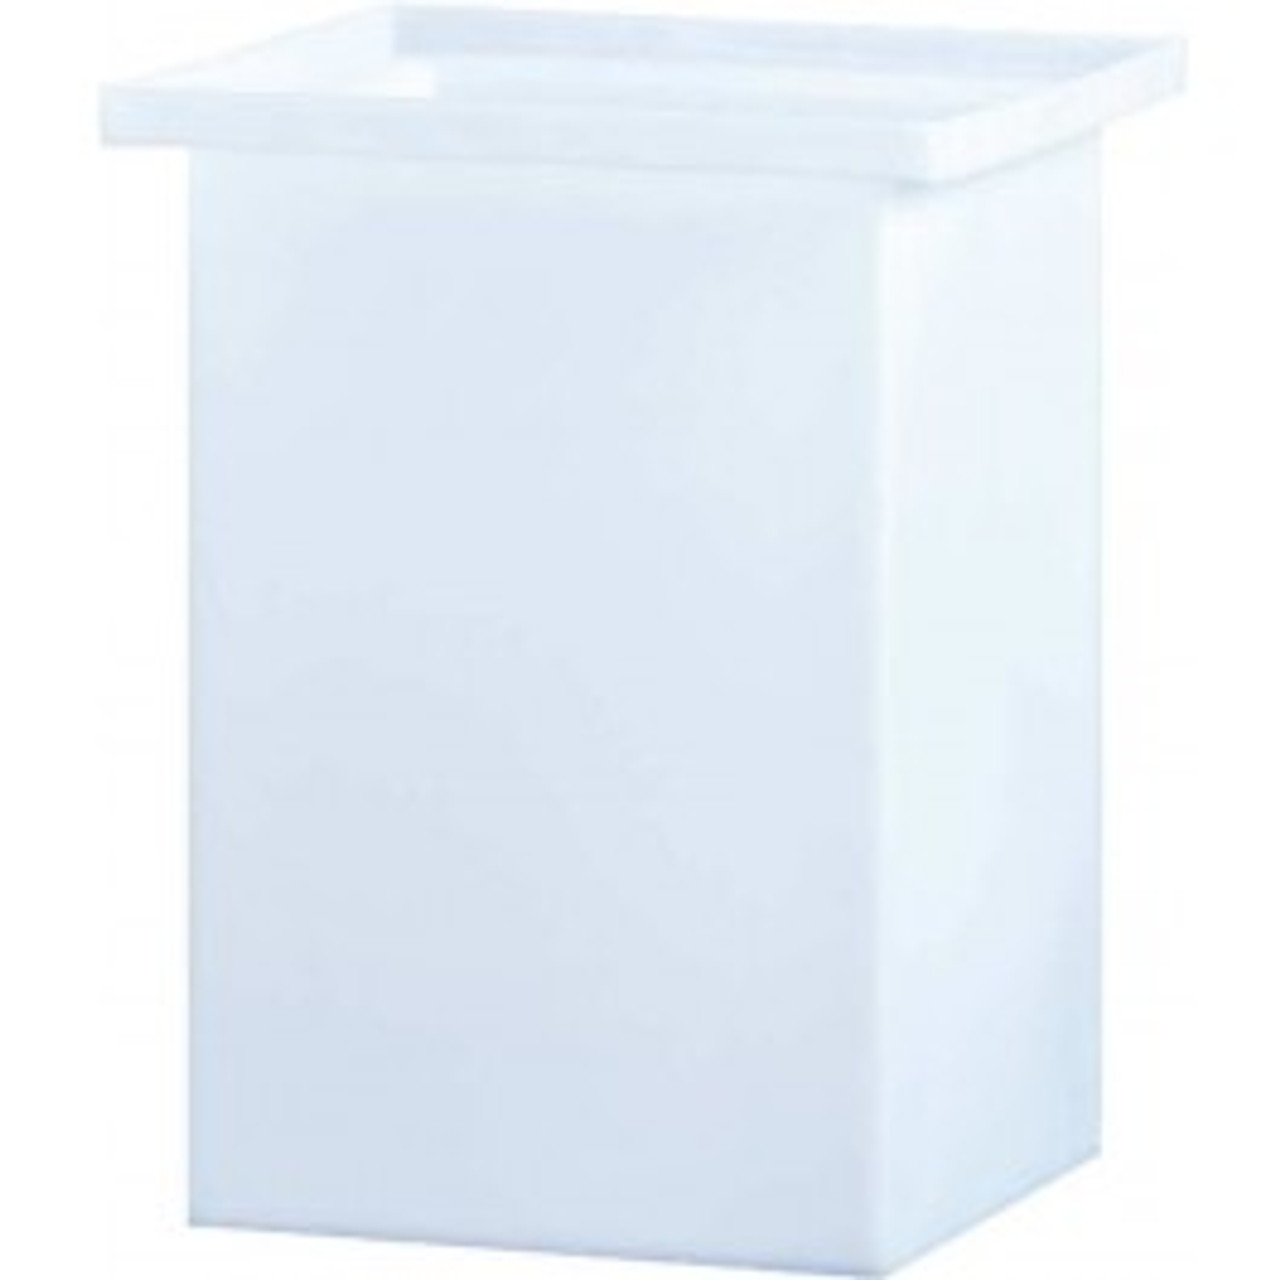 An image of a 30 Gallon PE Chem-Tainer White Rectangular Open Top Tank | R122424A